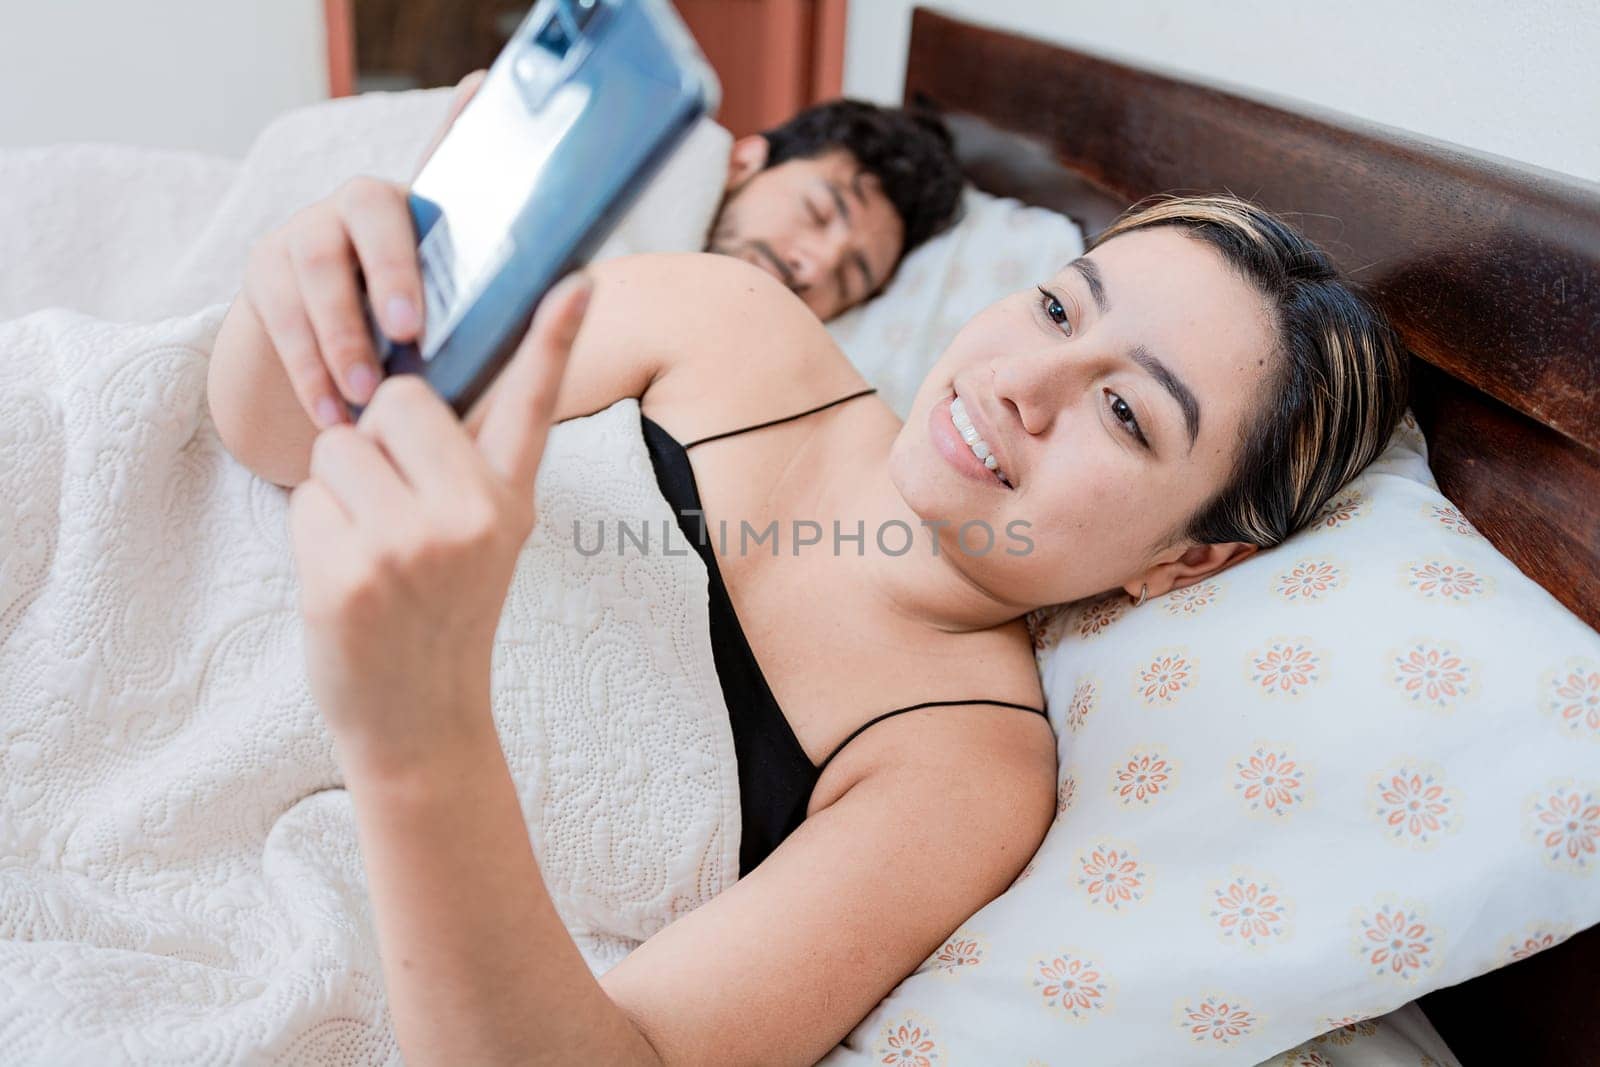 Unfaithful woman with phone while the man sleeps. Unfaithful girlfriend with phone while boyfriend sleeps, Unfaithful wife with phone while her husband sleeps by isaiphoto